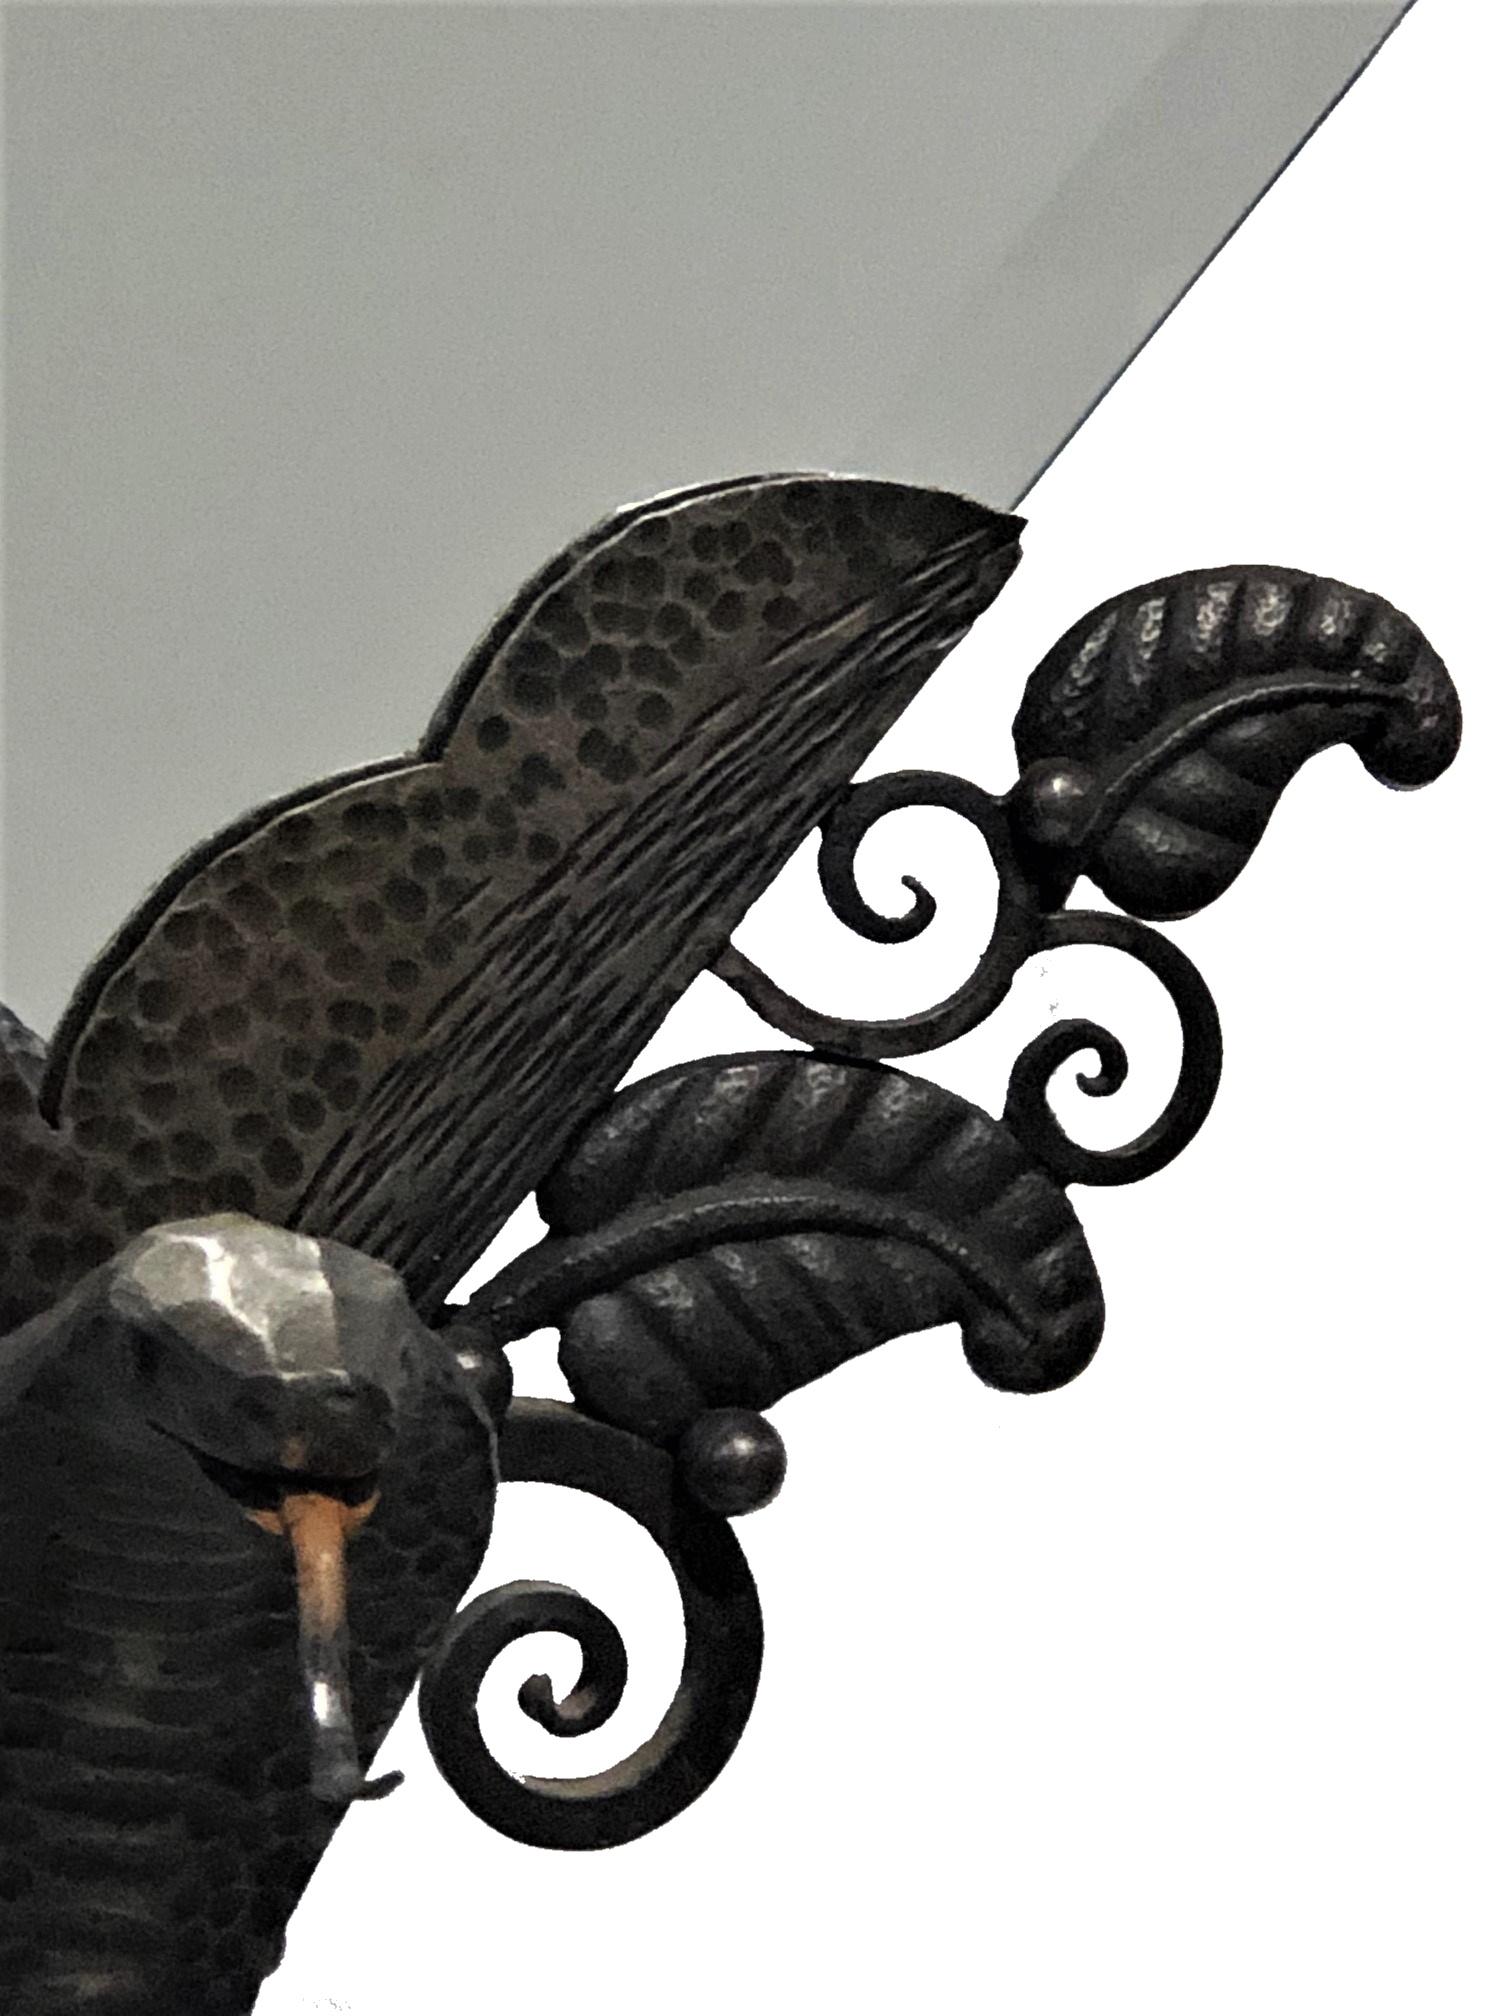 French Art Deco
Table Mirror w/ Snake Base
Wrought Iron
Circa 1920

ABOUT
This elegant wrought iron American Art Deco table mirror of an outstanding design features the finest forged iron, a stand with an unusual composition of a coiled snake